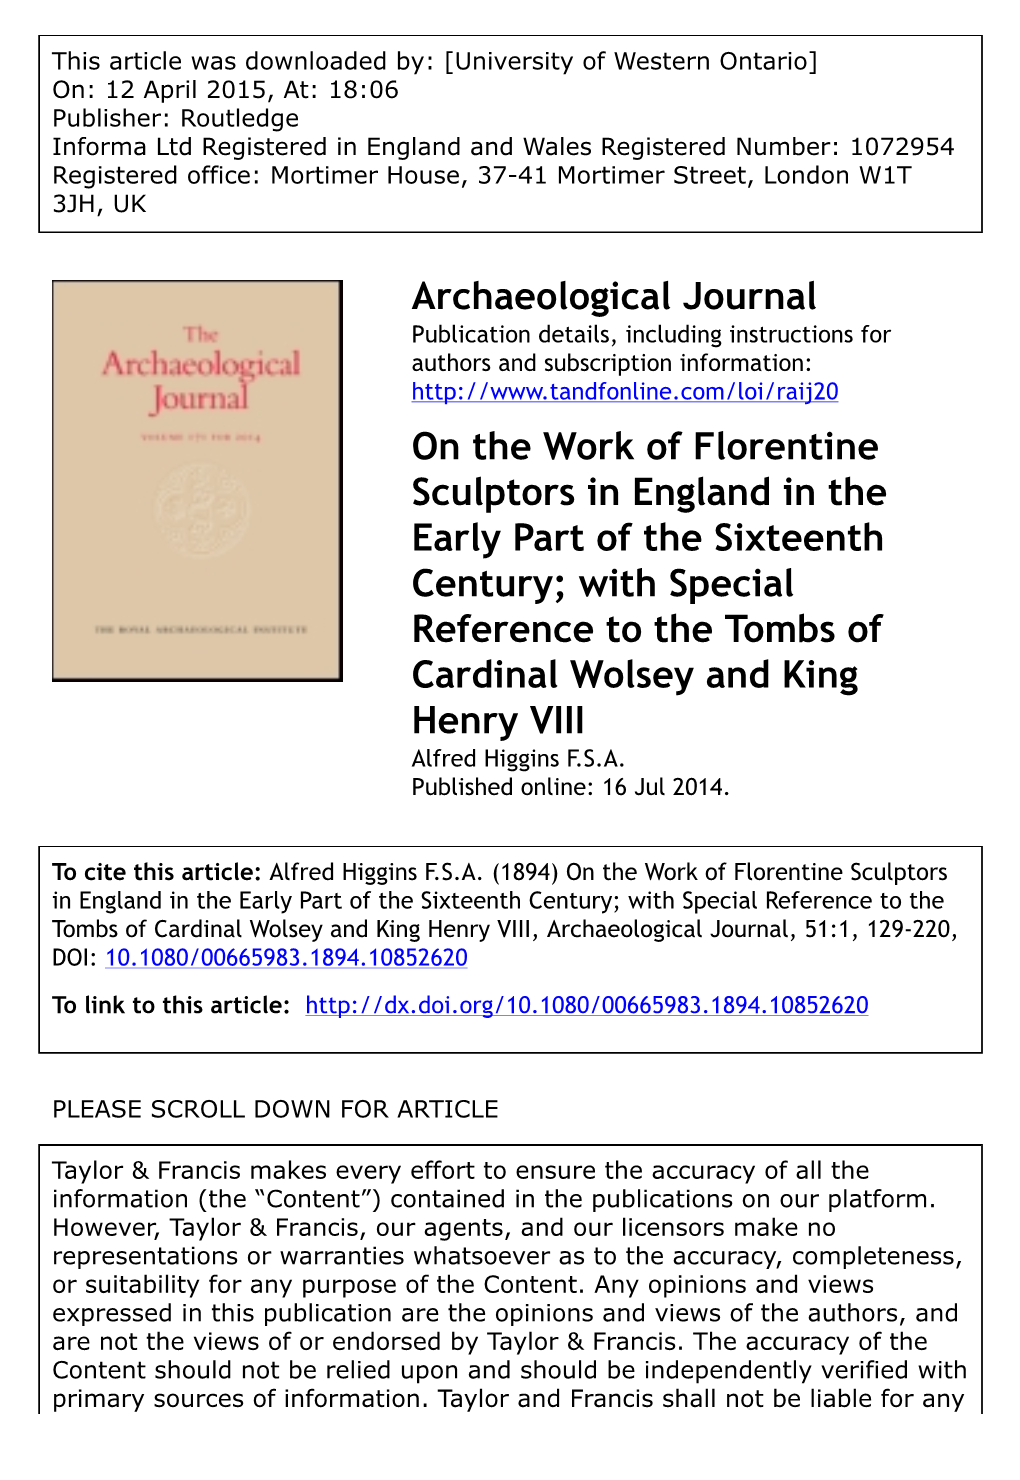 Archaeological Journal on the Work of Florentine Sculptors in England in the Early Part of the Sixteenth Century